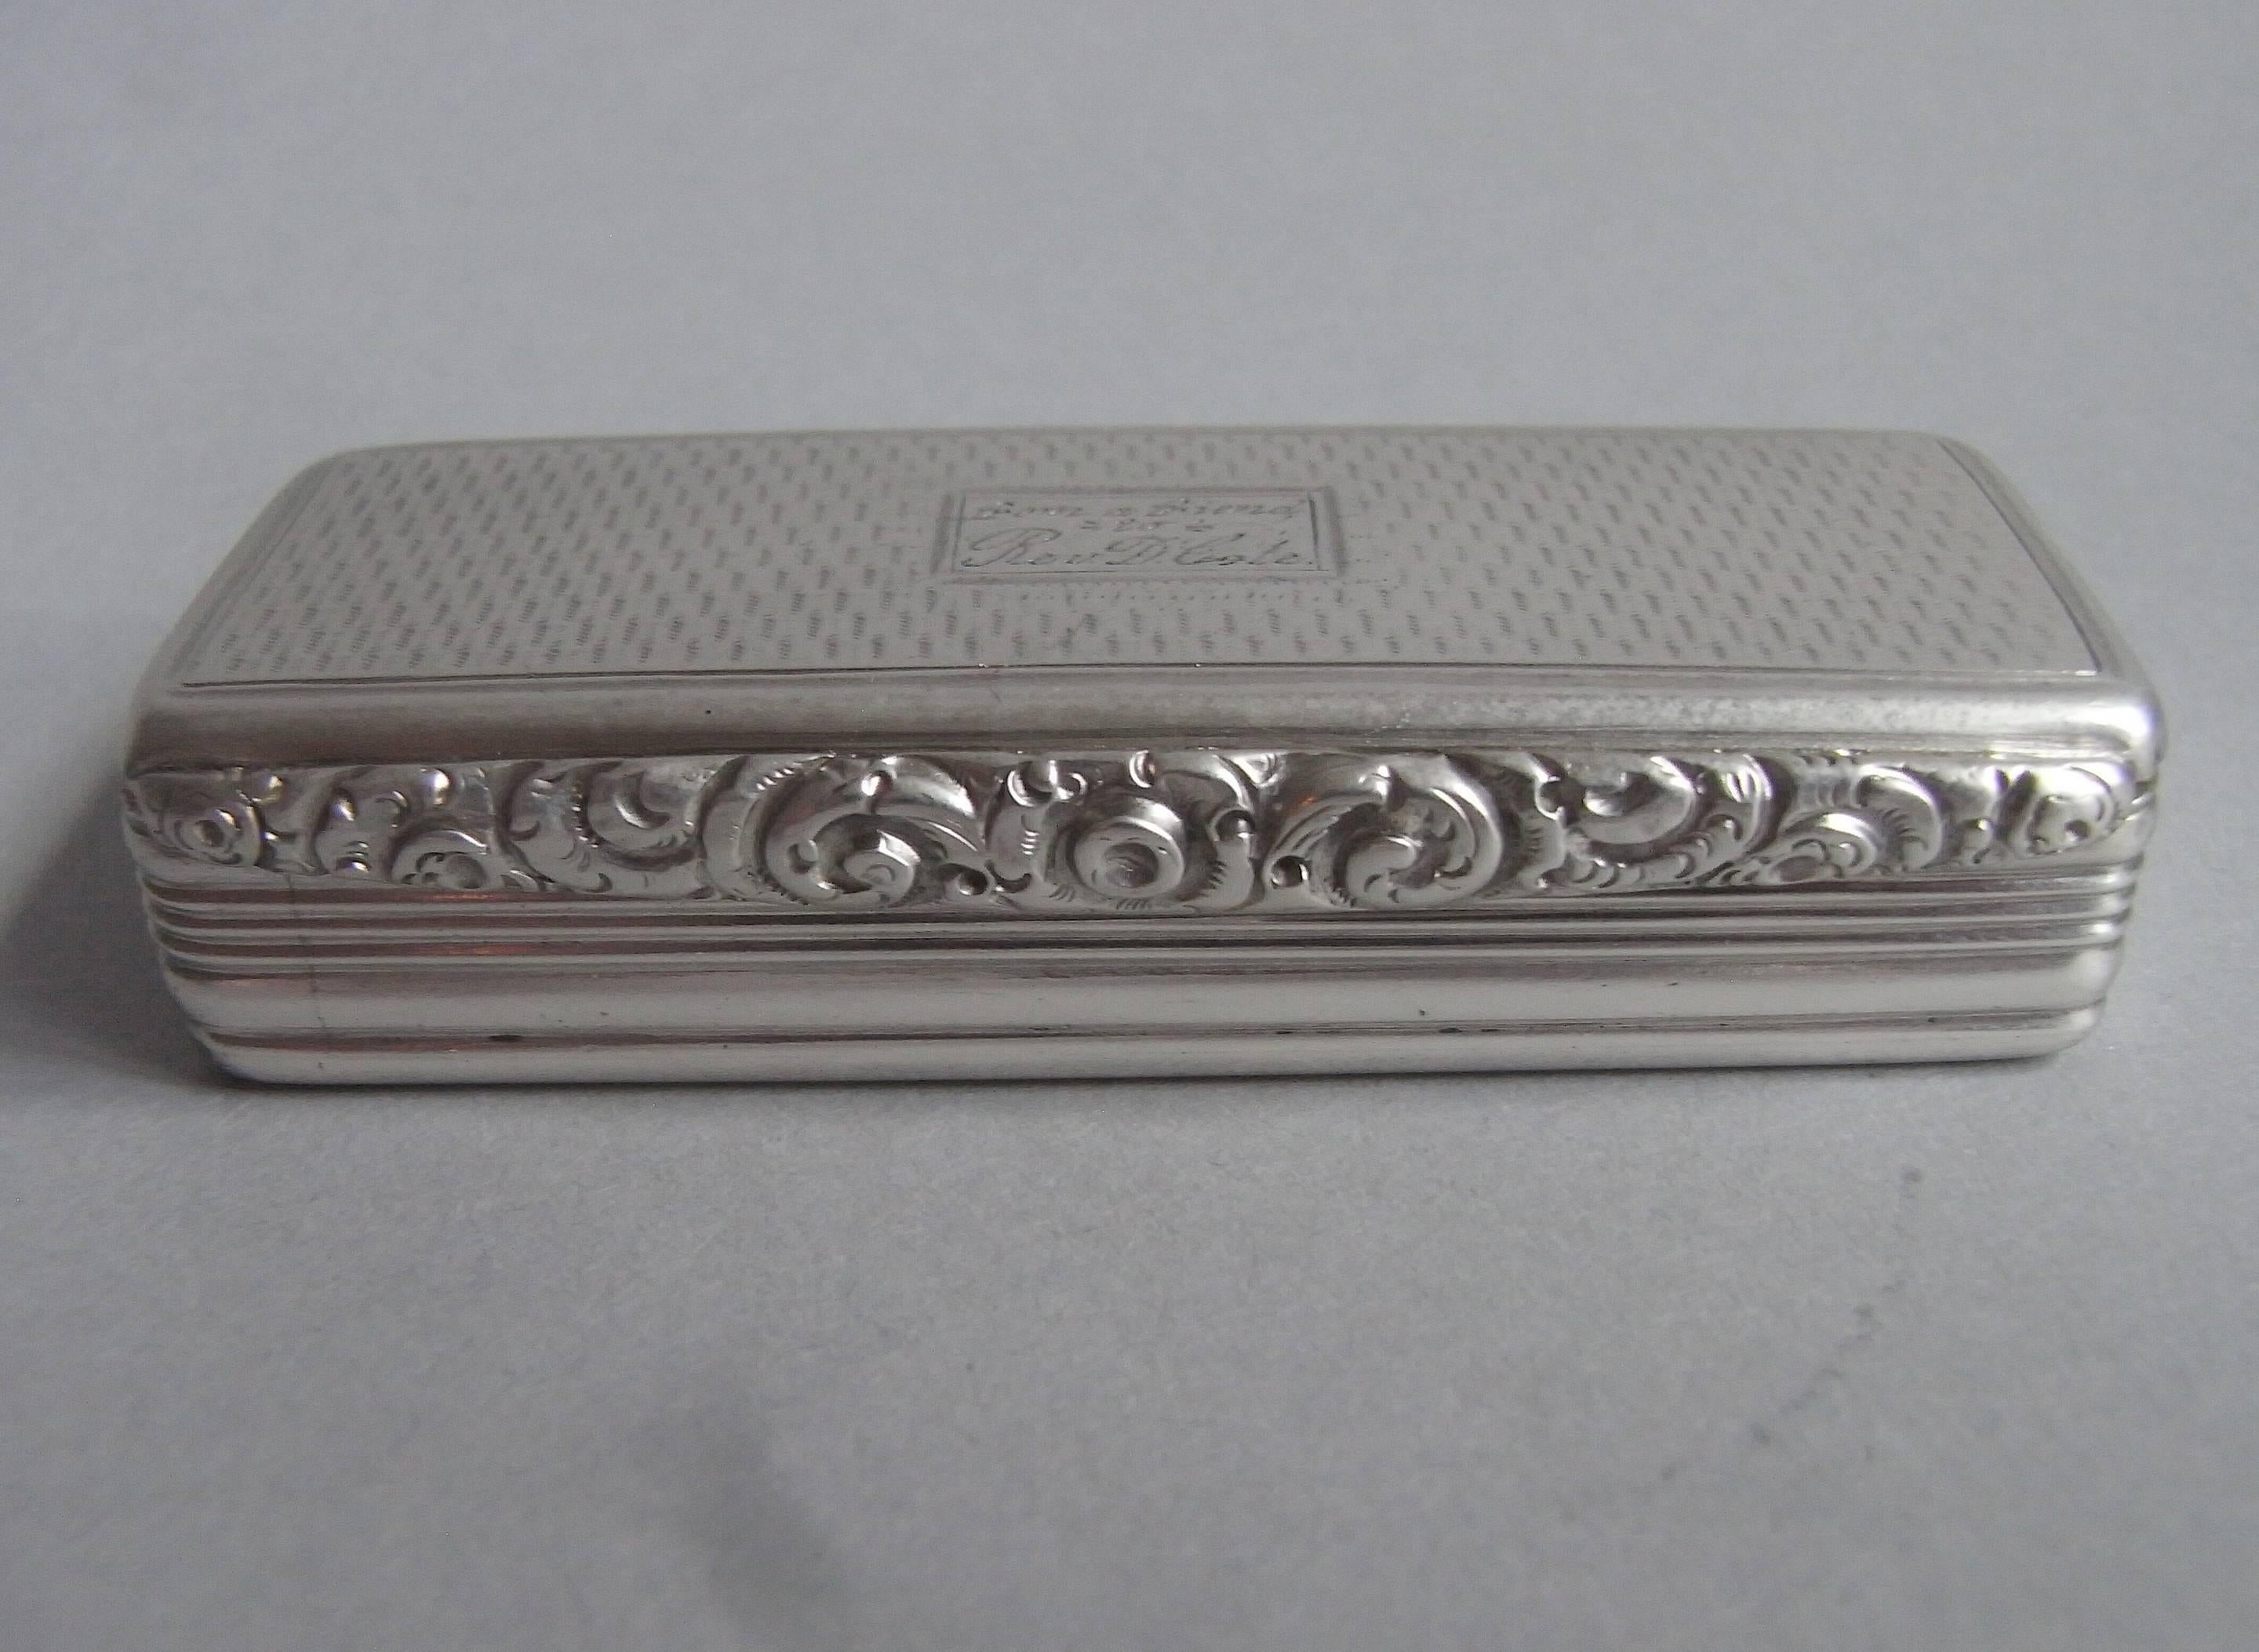 The snuff box is of slender broad rectangular form. The cover and base are decorated with engine turned designs and the sides with reeding. This example displays a floral and foliate cast thumb piece and the cover also displays an oblong cartouche